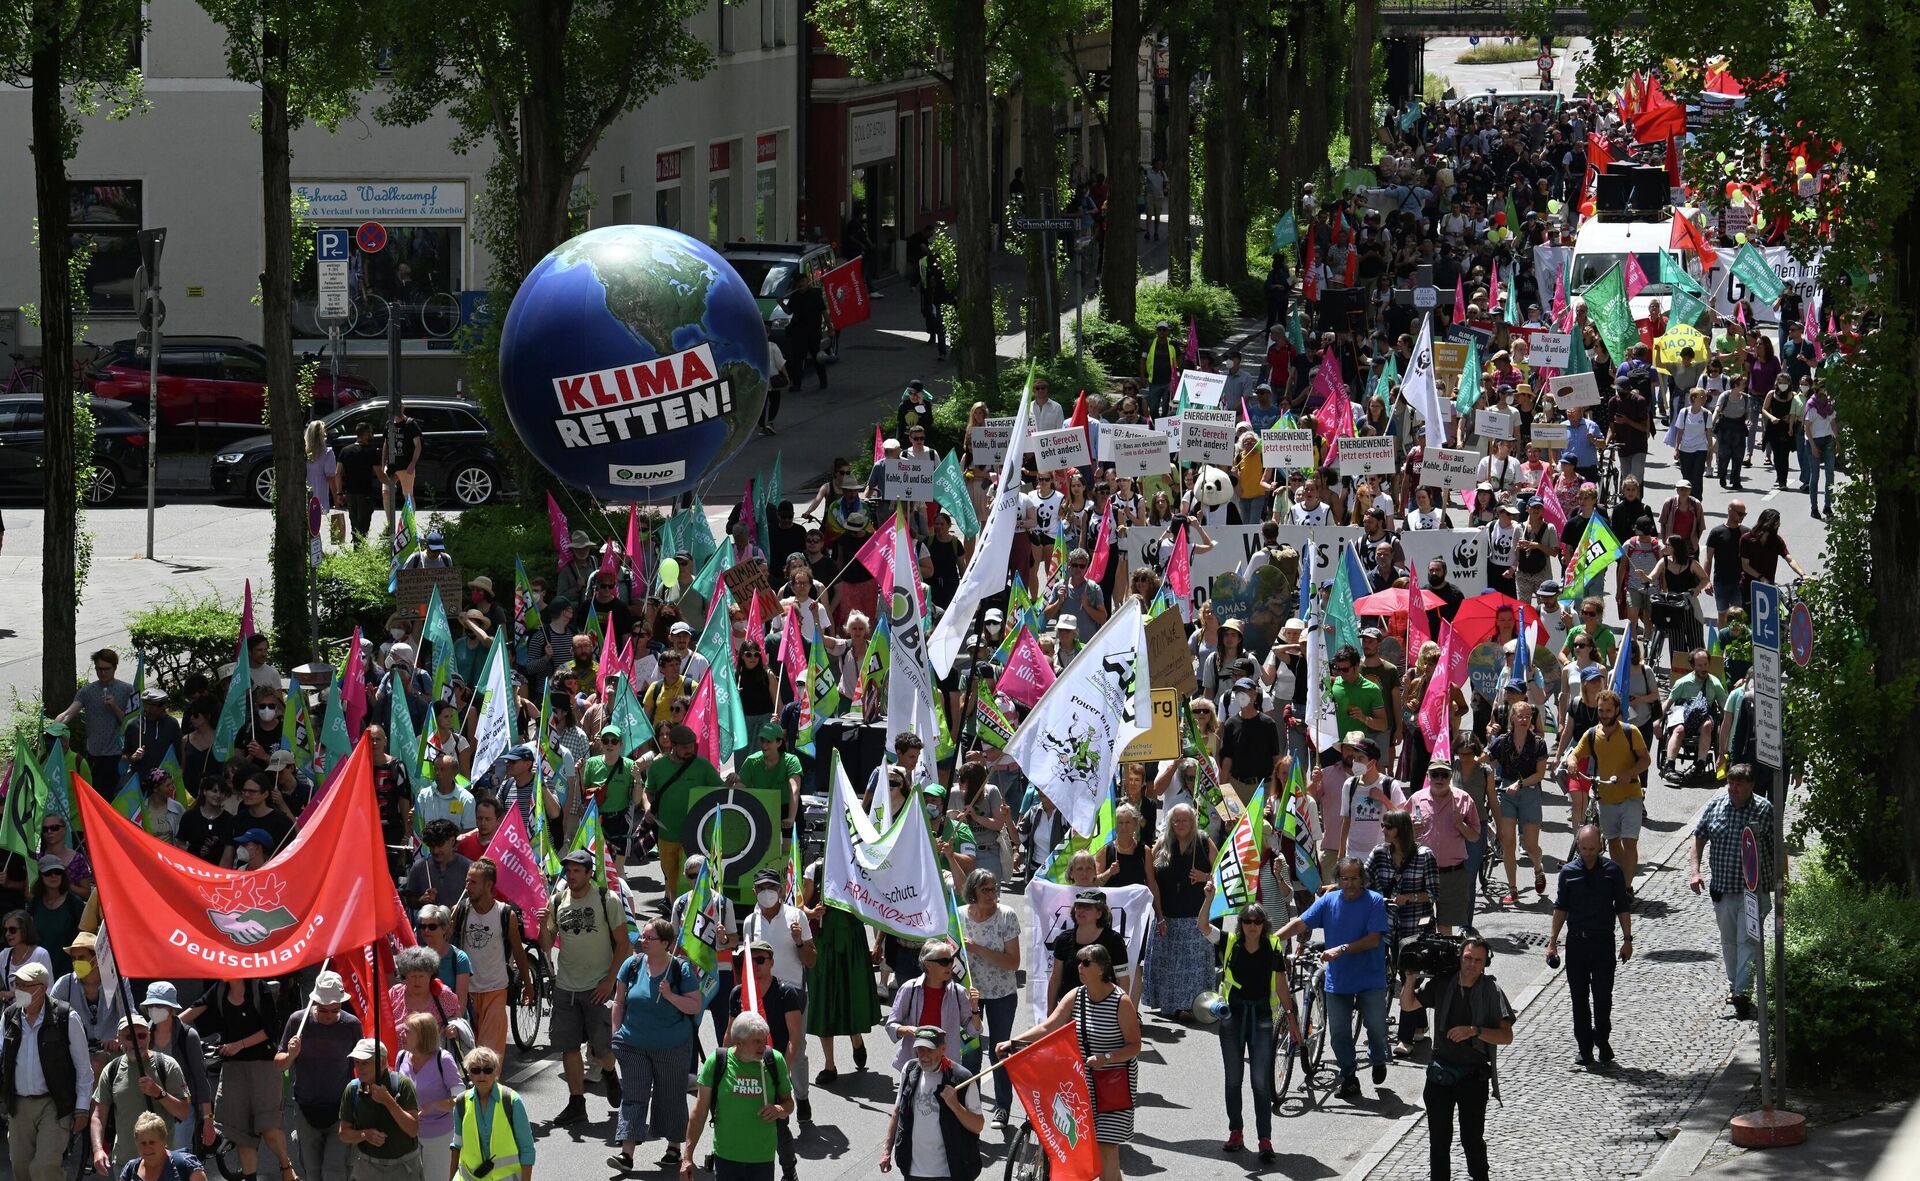 Protesters take part in a demonstration called for by Greenpeace, Attac and other organisations ahead of the G7 Summit in Munich, southern Germany on June 25, 2022. - Sputnik International, 1920, 25.06.2022